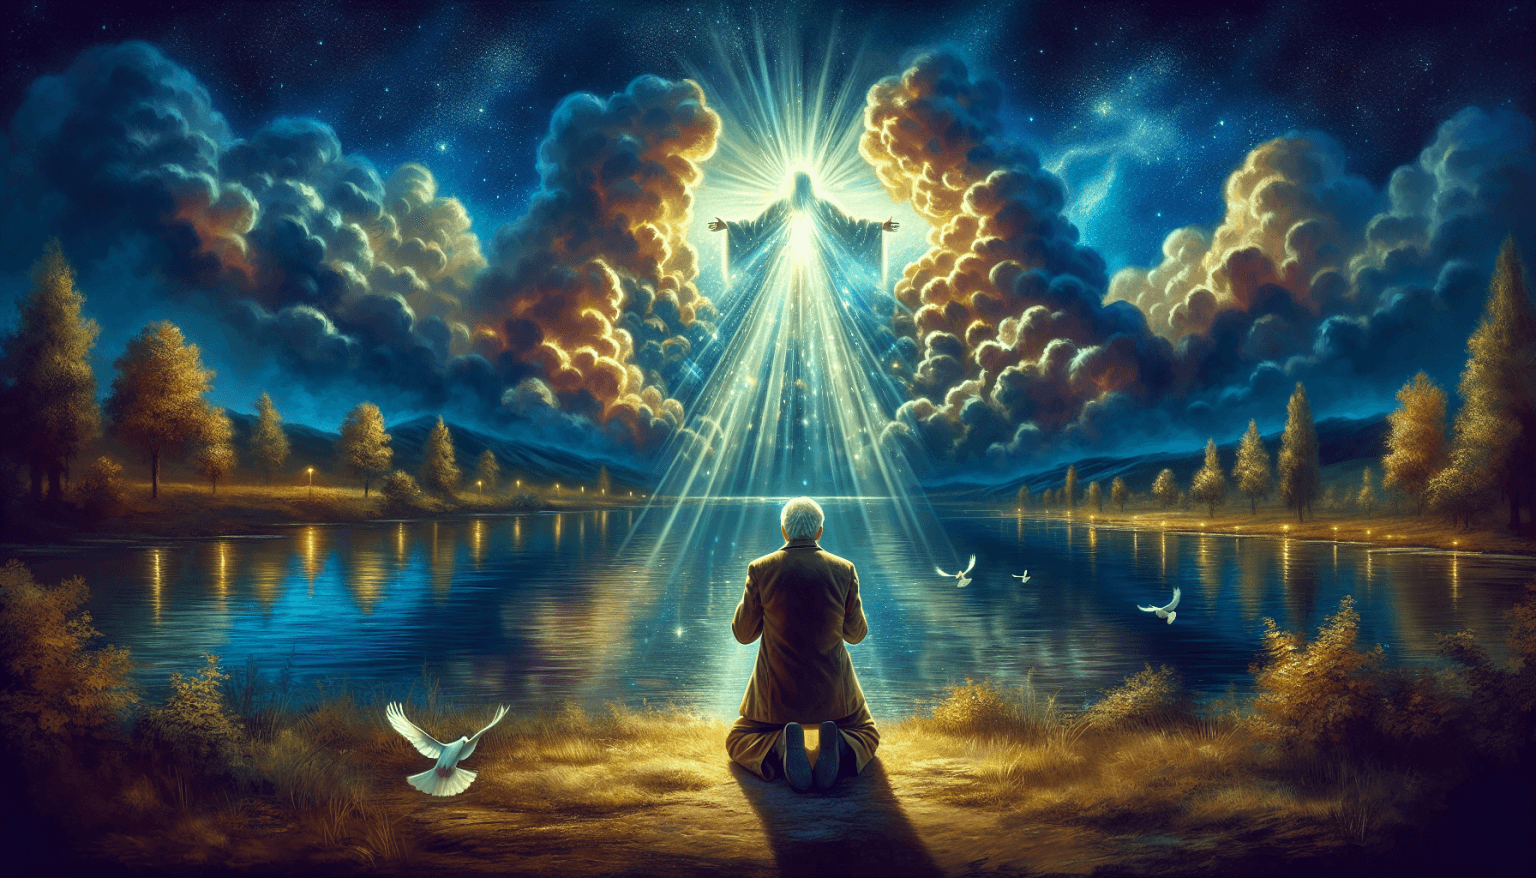 An elderly man kneeling beside a serene lake under a starlit sky, praying to a glowing figure of Saint Peter who is parting clouds above, surrounded by a flock of doves and shimmering light rays illum